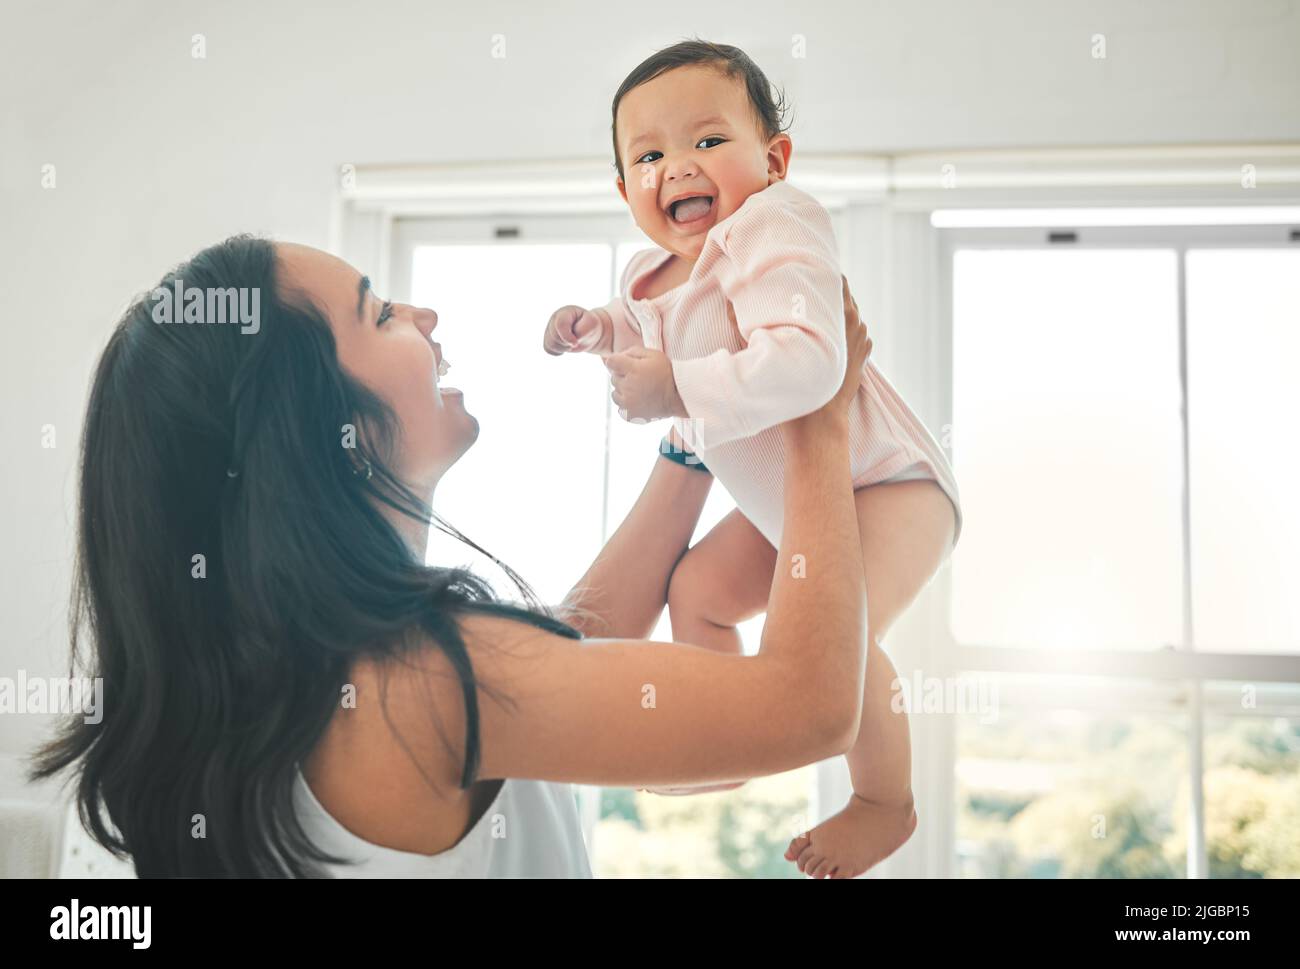 Such a happy baby. an attractive young woman and her newborn baby at home. Stock Photo